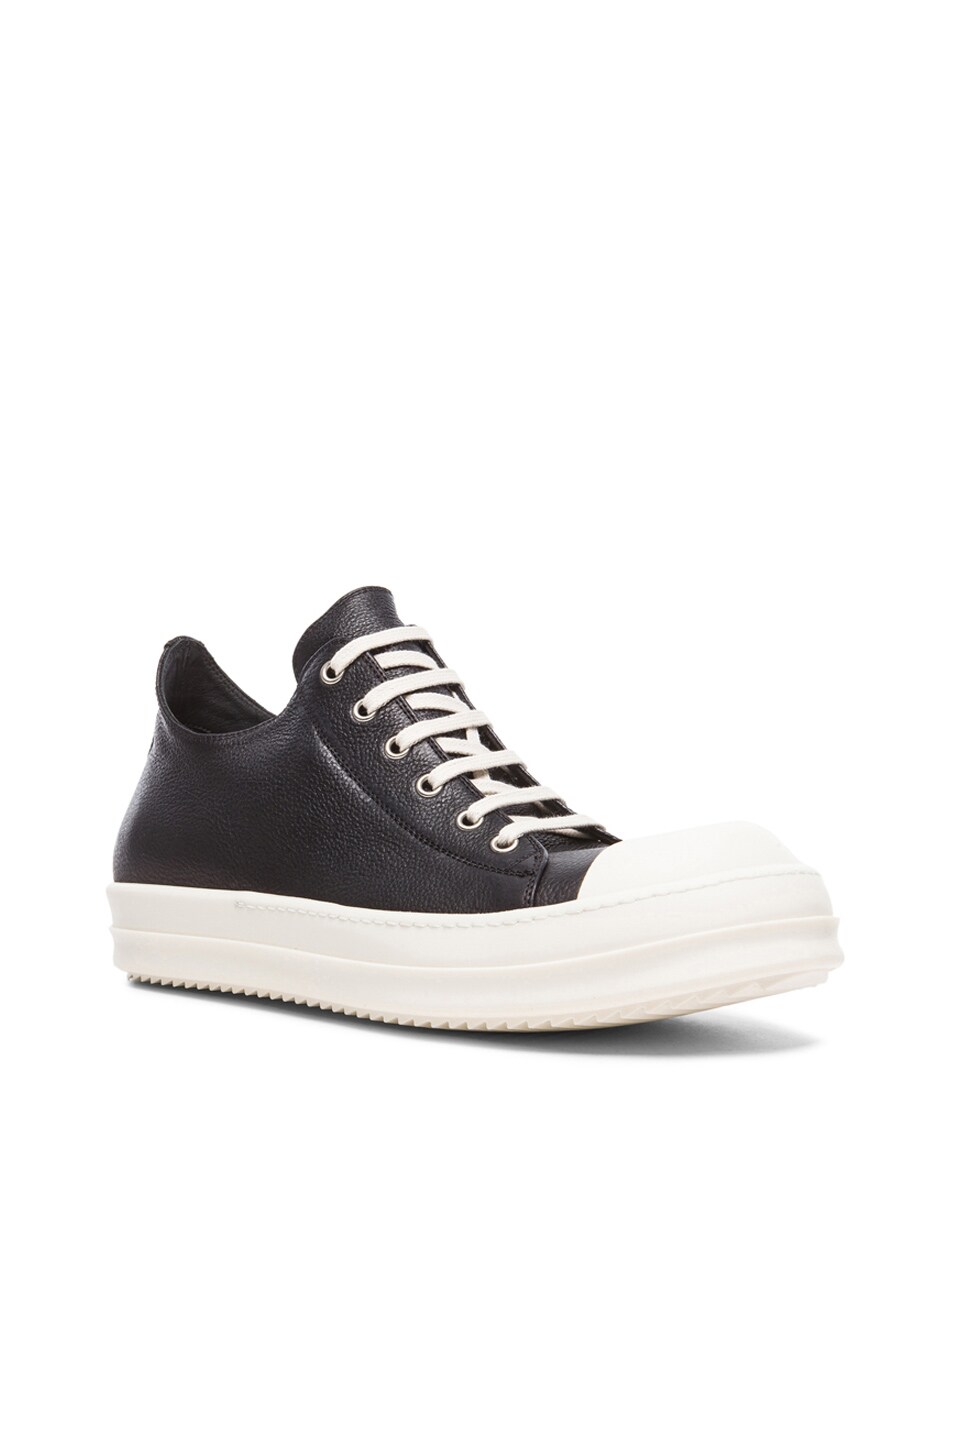 Image 1 of Rick Owens Low Leather Sneakers in Black & White